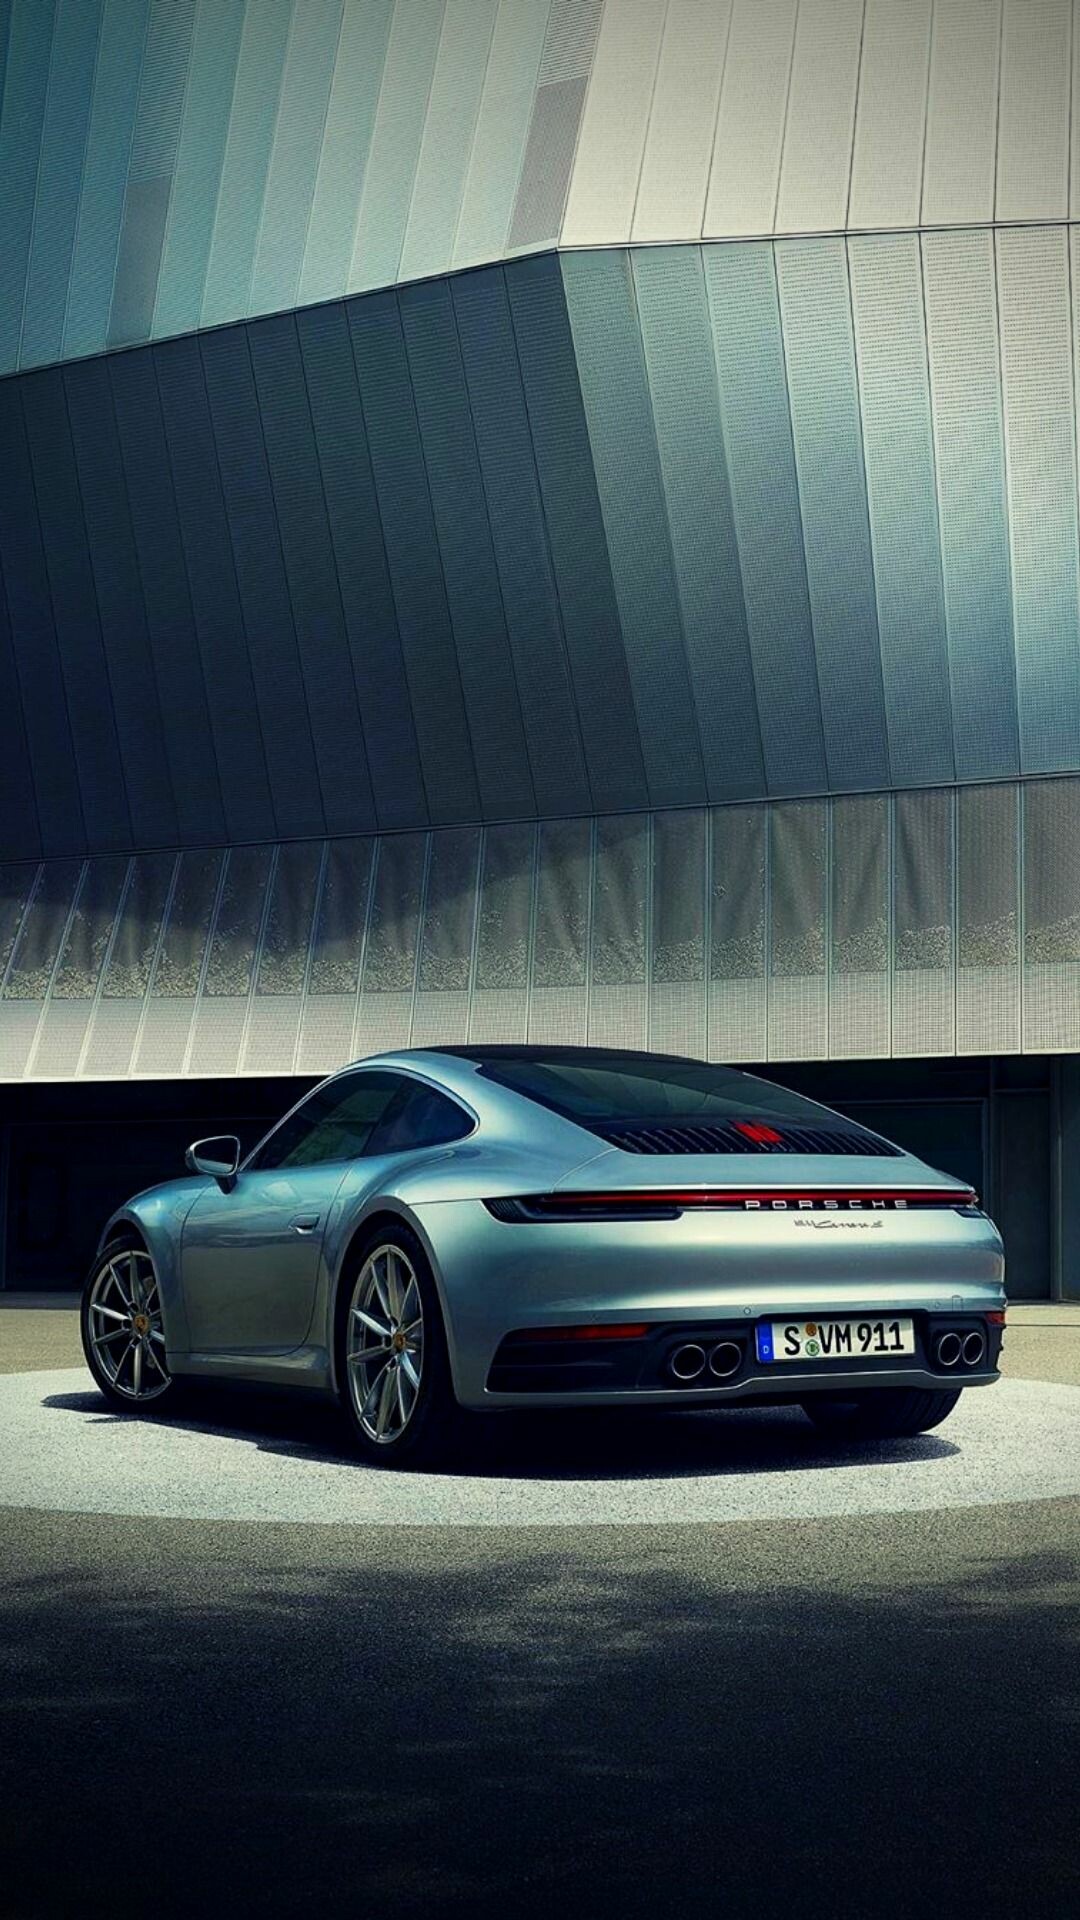 Porsche 911: The 991 brcame the first variation to use a predominantly aluminium construction. 1080x1920 Full HD Wallpaper.